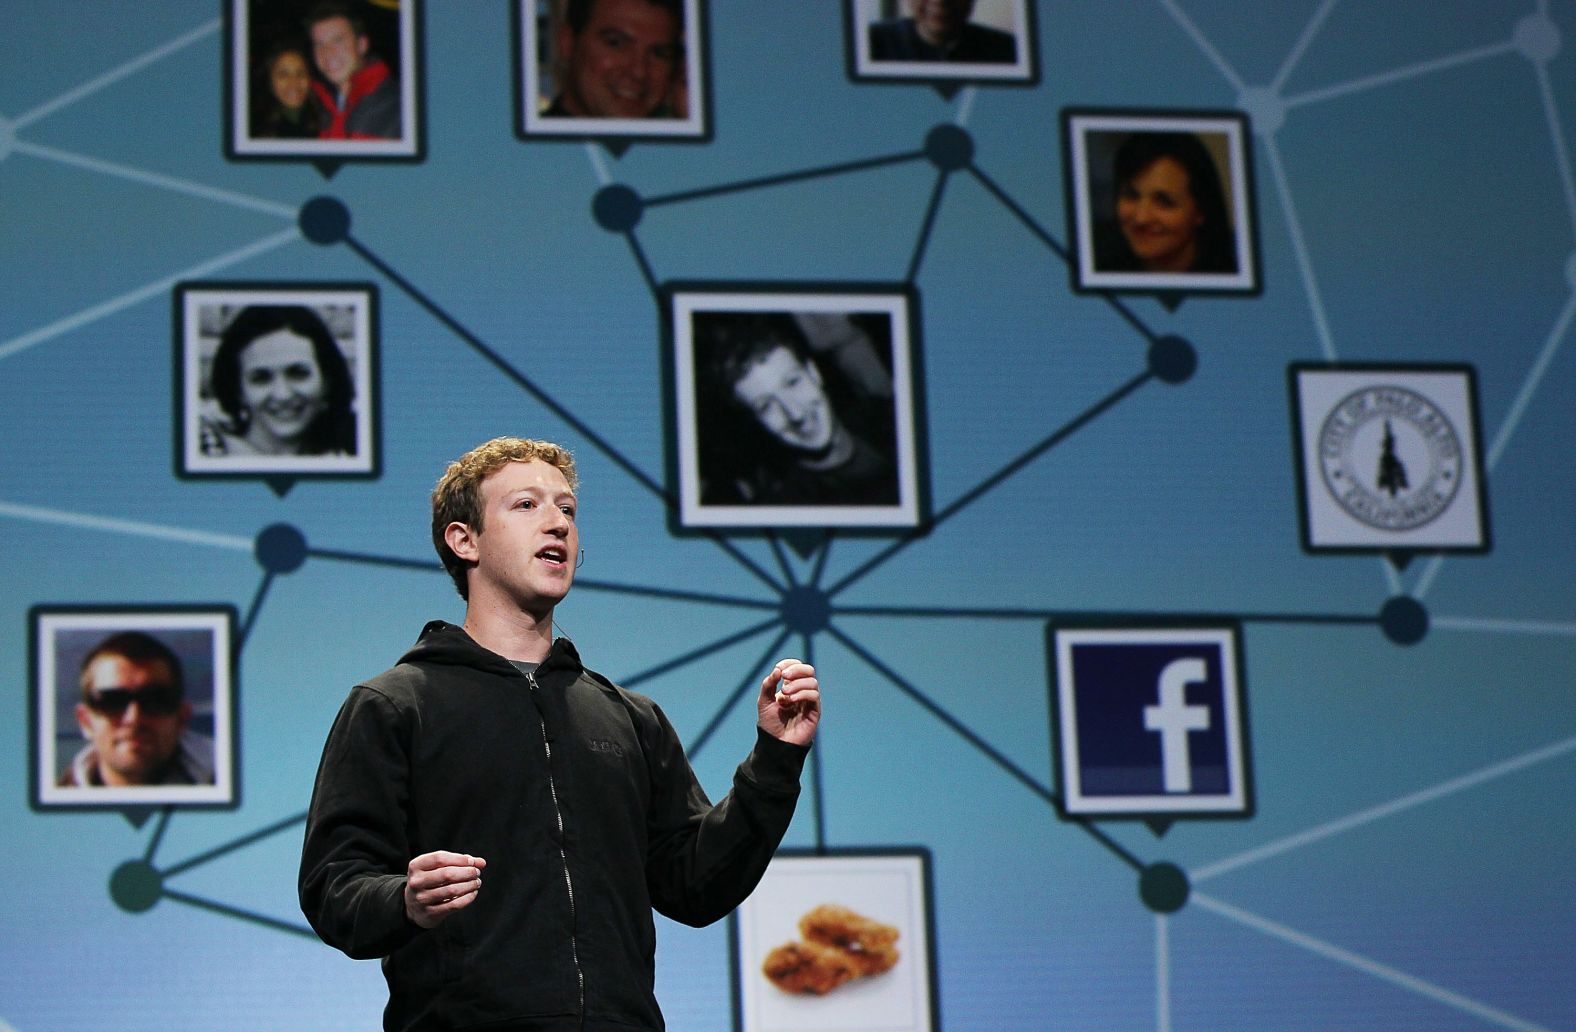 Zuckerberg delivers the opening keynote address at the F8 Developer Conference in San Francisco in April 2010.